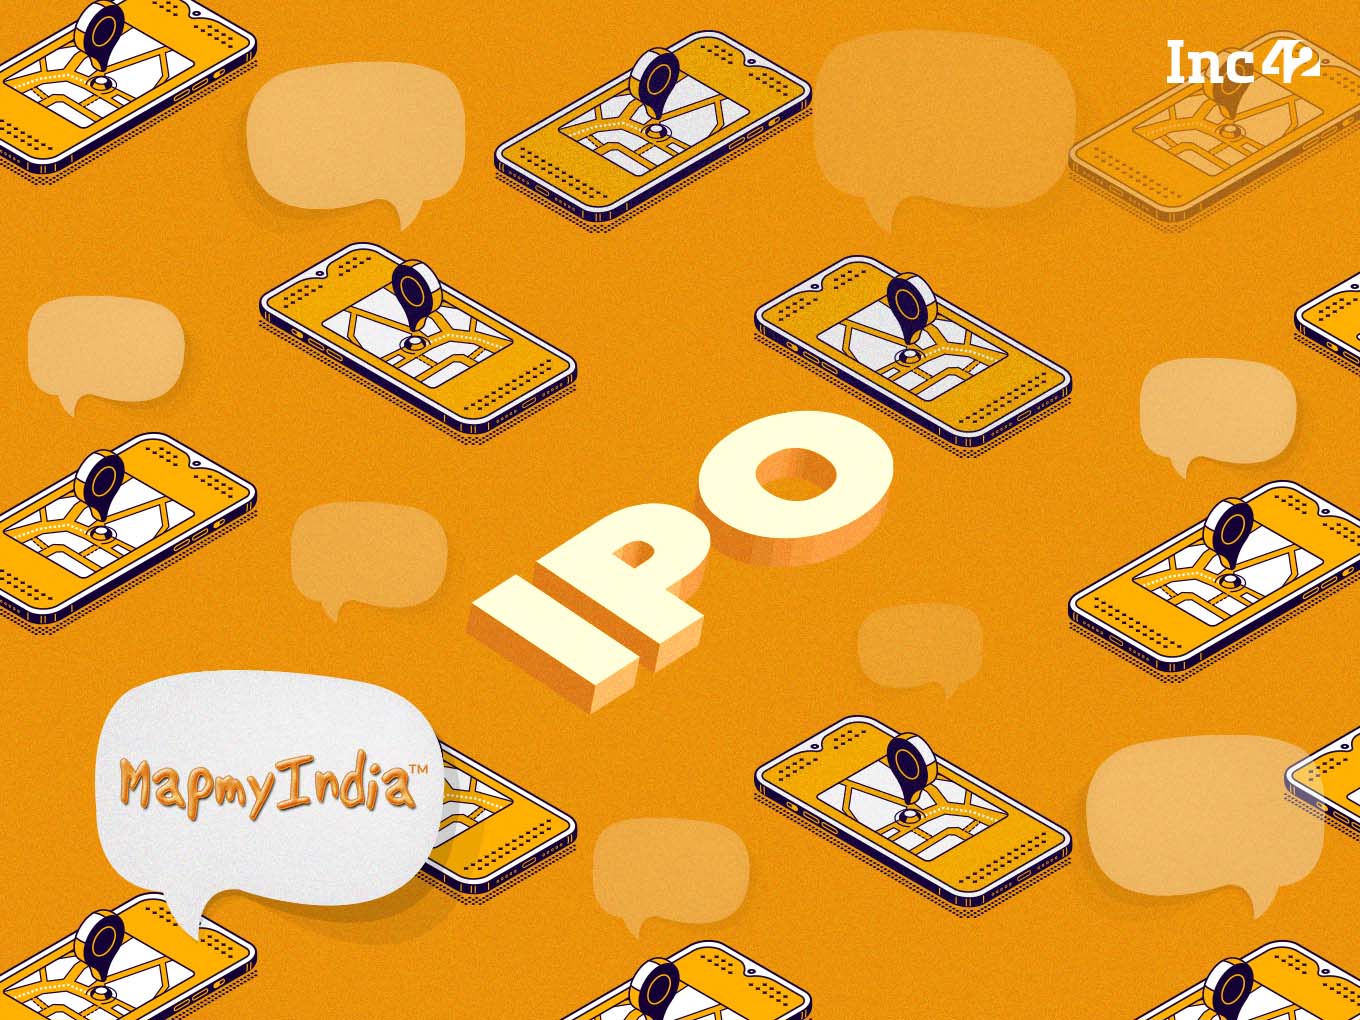 MapmyIndia IPO Booked 2X On Day 1 Backed By Retail Investors, NIIs